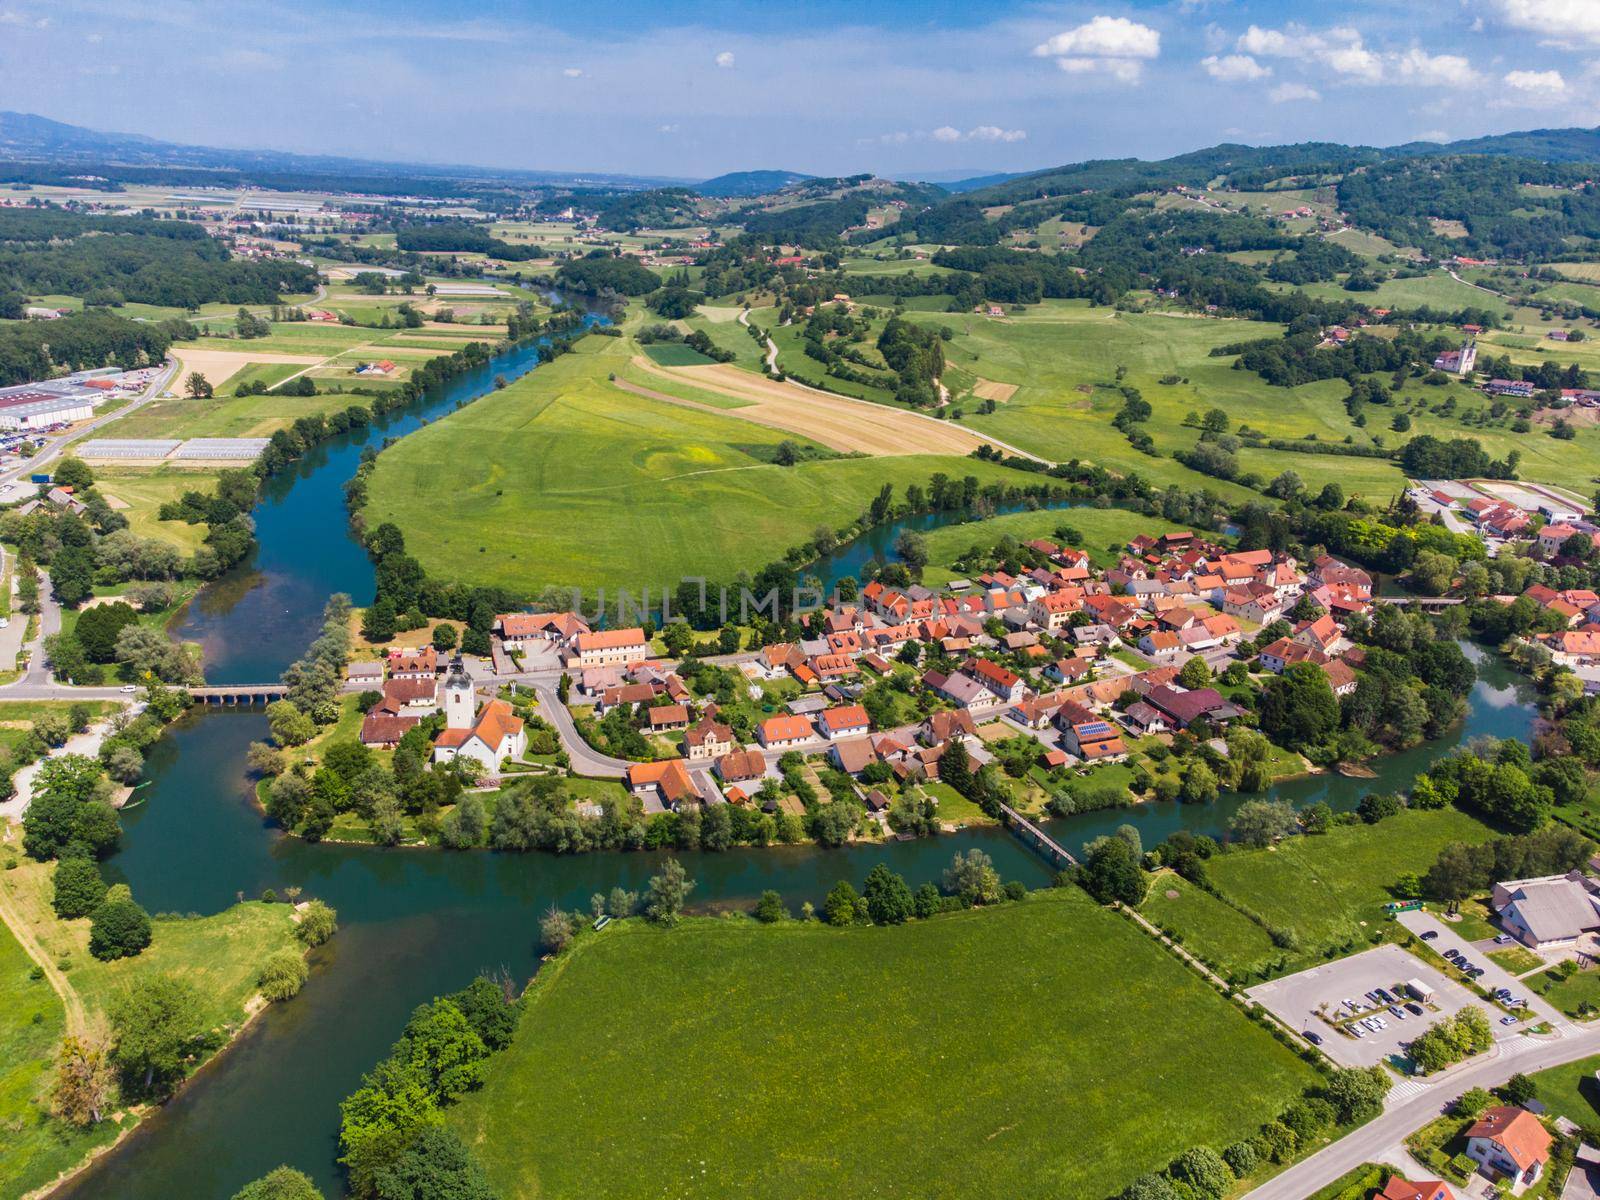 Kostanjevica na Krki Medieval Town Surrounded by Krka River, Slovenia, Europe. Aerial view. by kasto